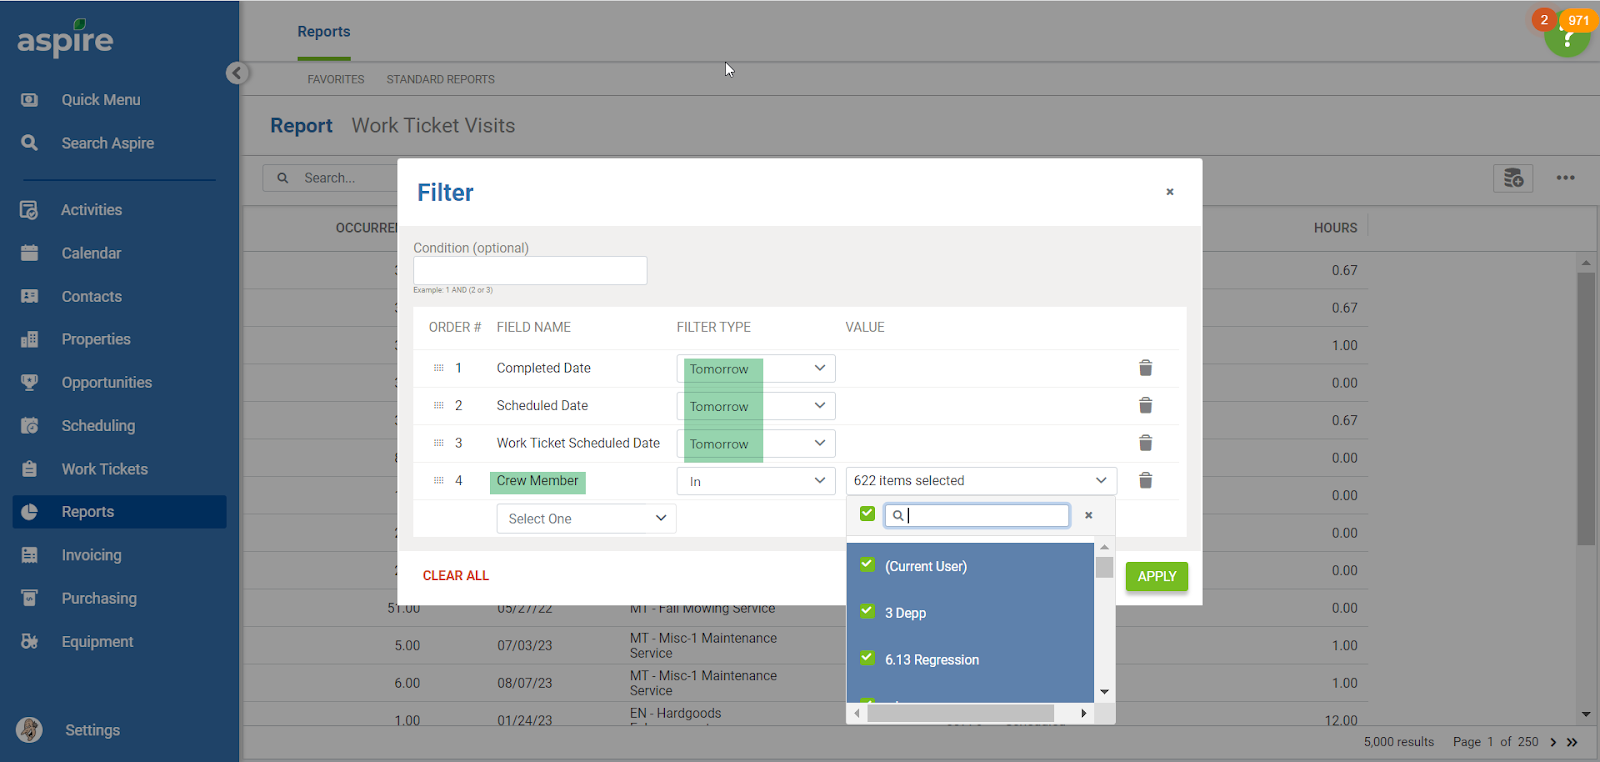 Built for you: Daily plan, SMS visit reminders, and CRM enhancements